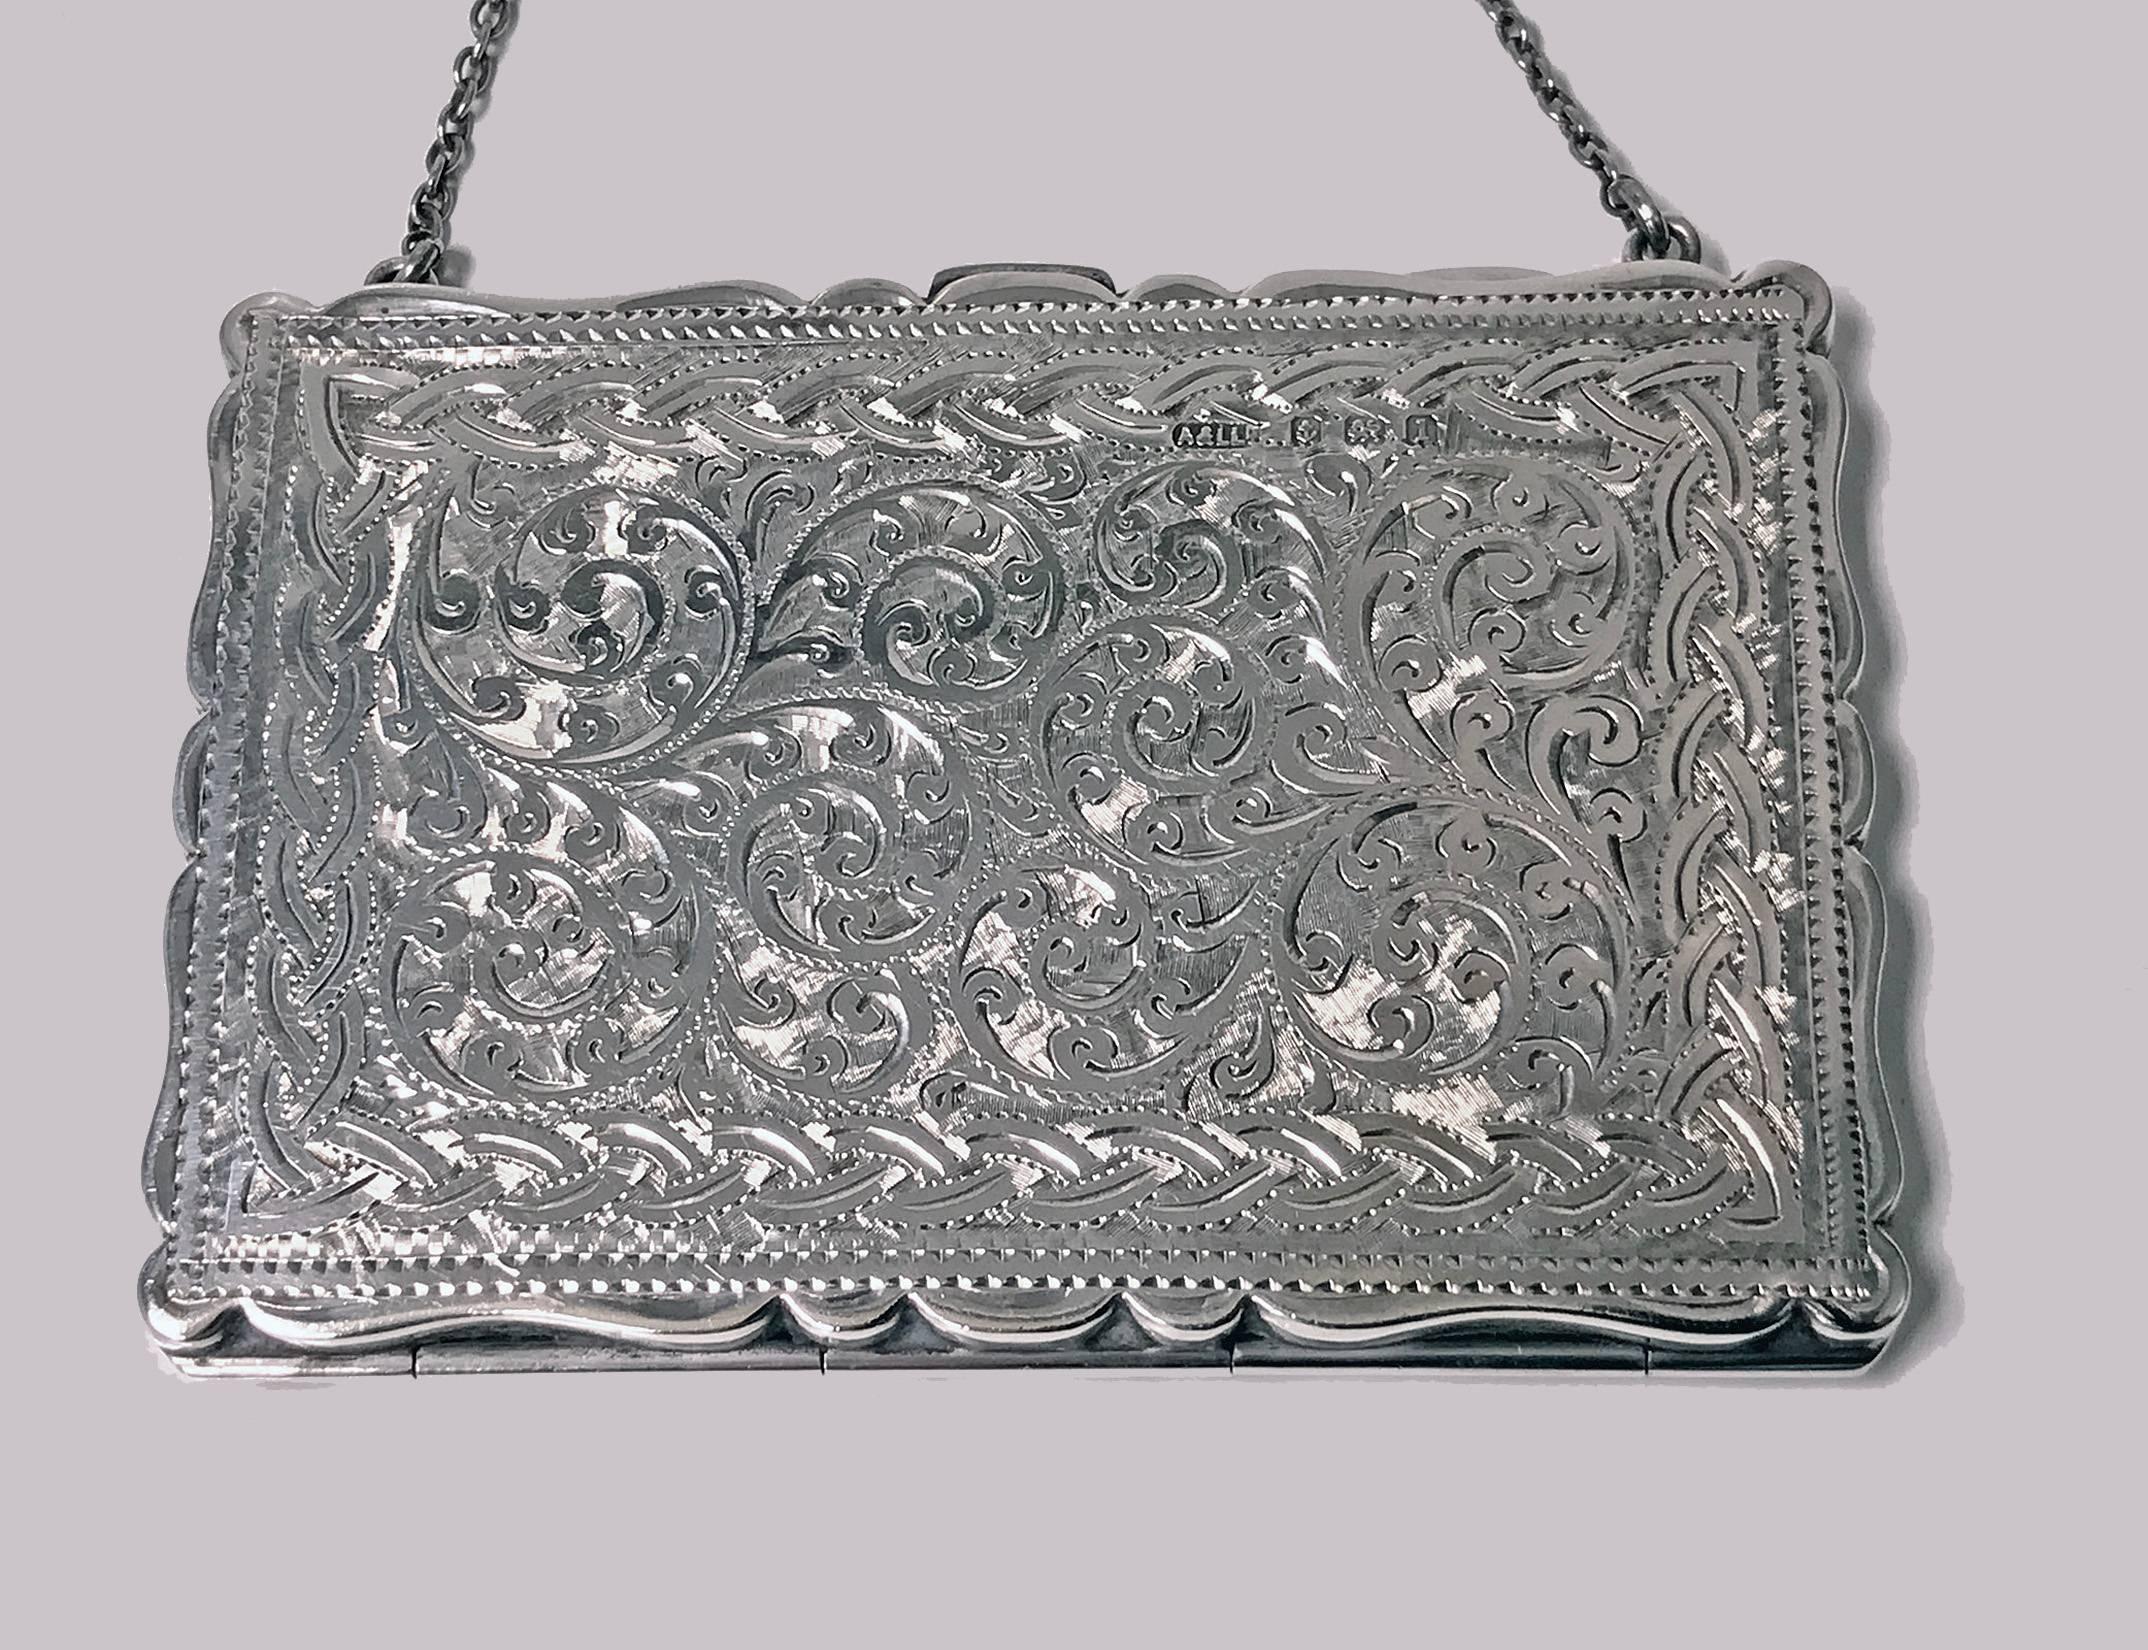 Antique Silver Card Case in form of purse, Birmingham 1910, Adie & Lovekin Ltd. The case of hinge and thumb piece design, richly engraved scroll foliage decoration, light monogram possibly MJ. Measures: 3.75 x 2.625 inches (excluding chain). Weight: